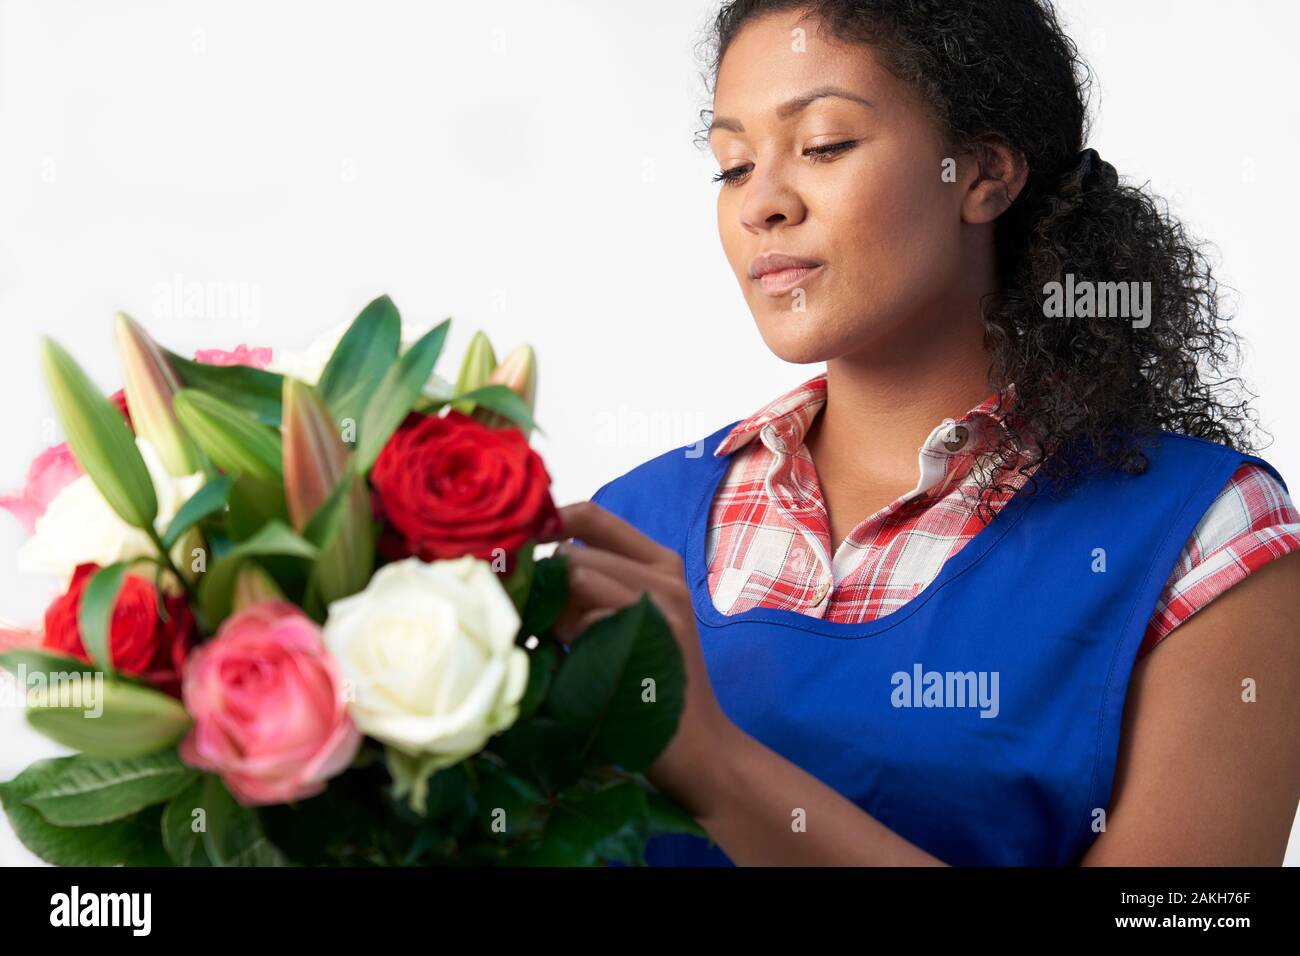 Female Florist Arranging Bouquet Of Lillies And Roses Against White Background Stock Photo